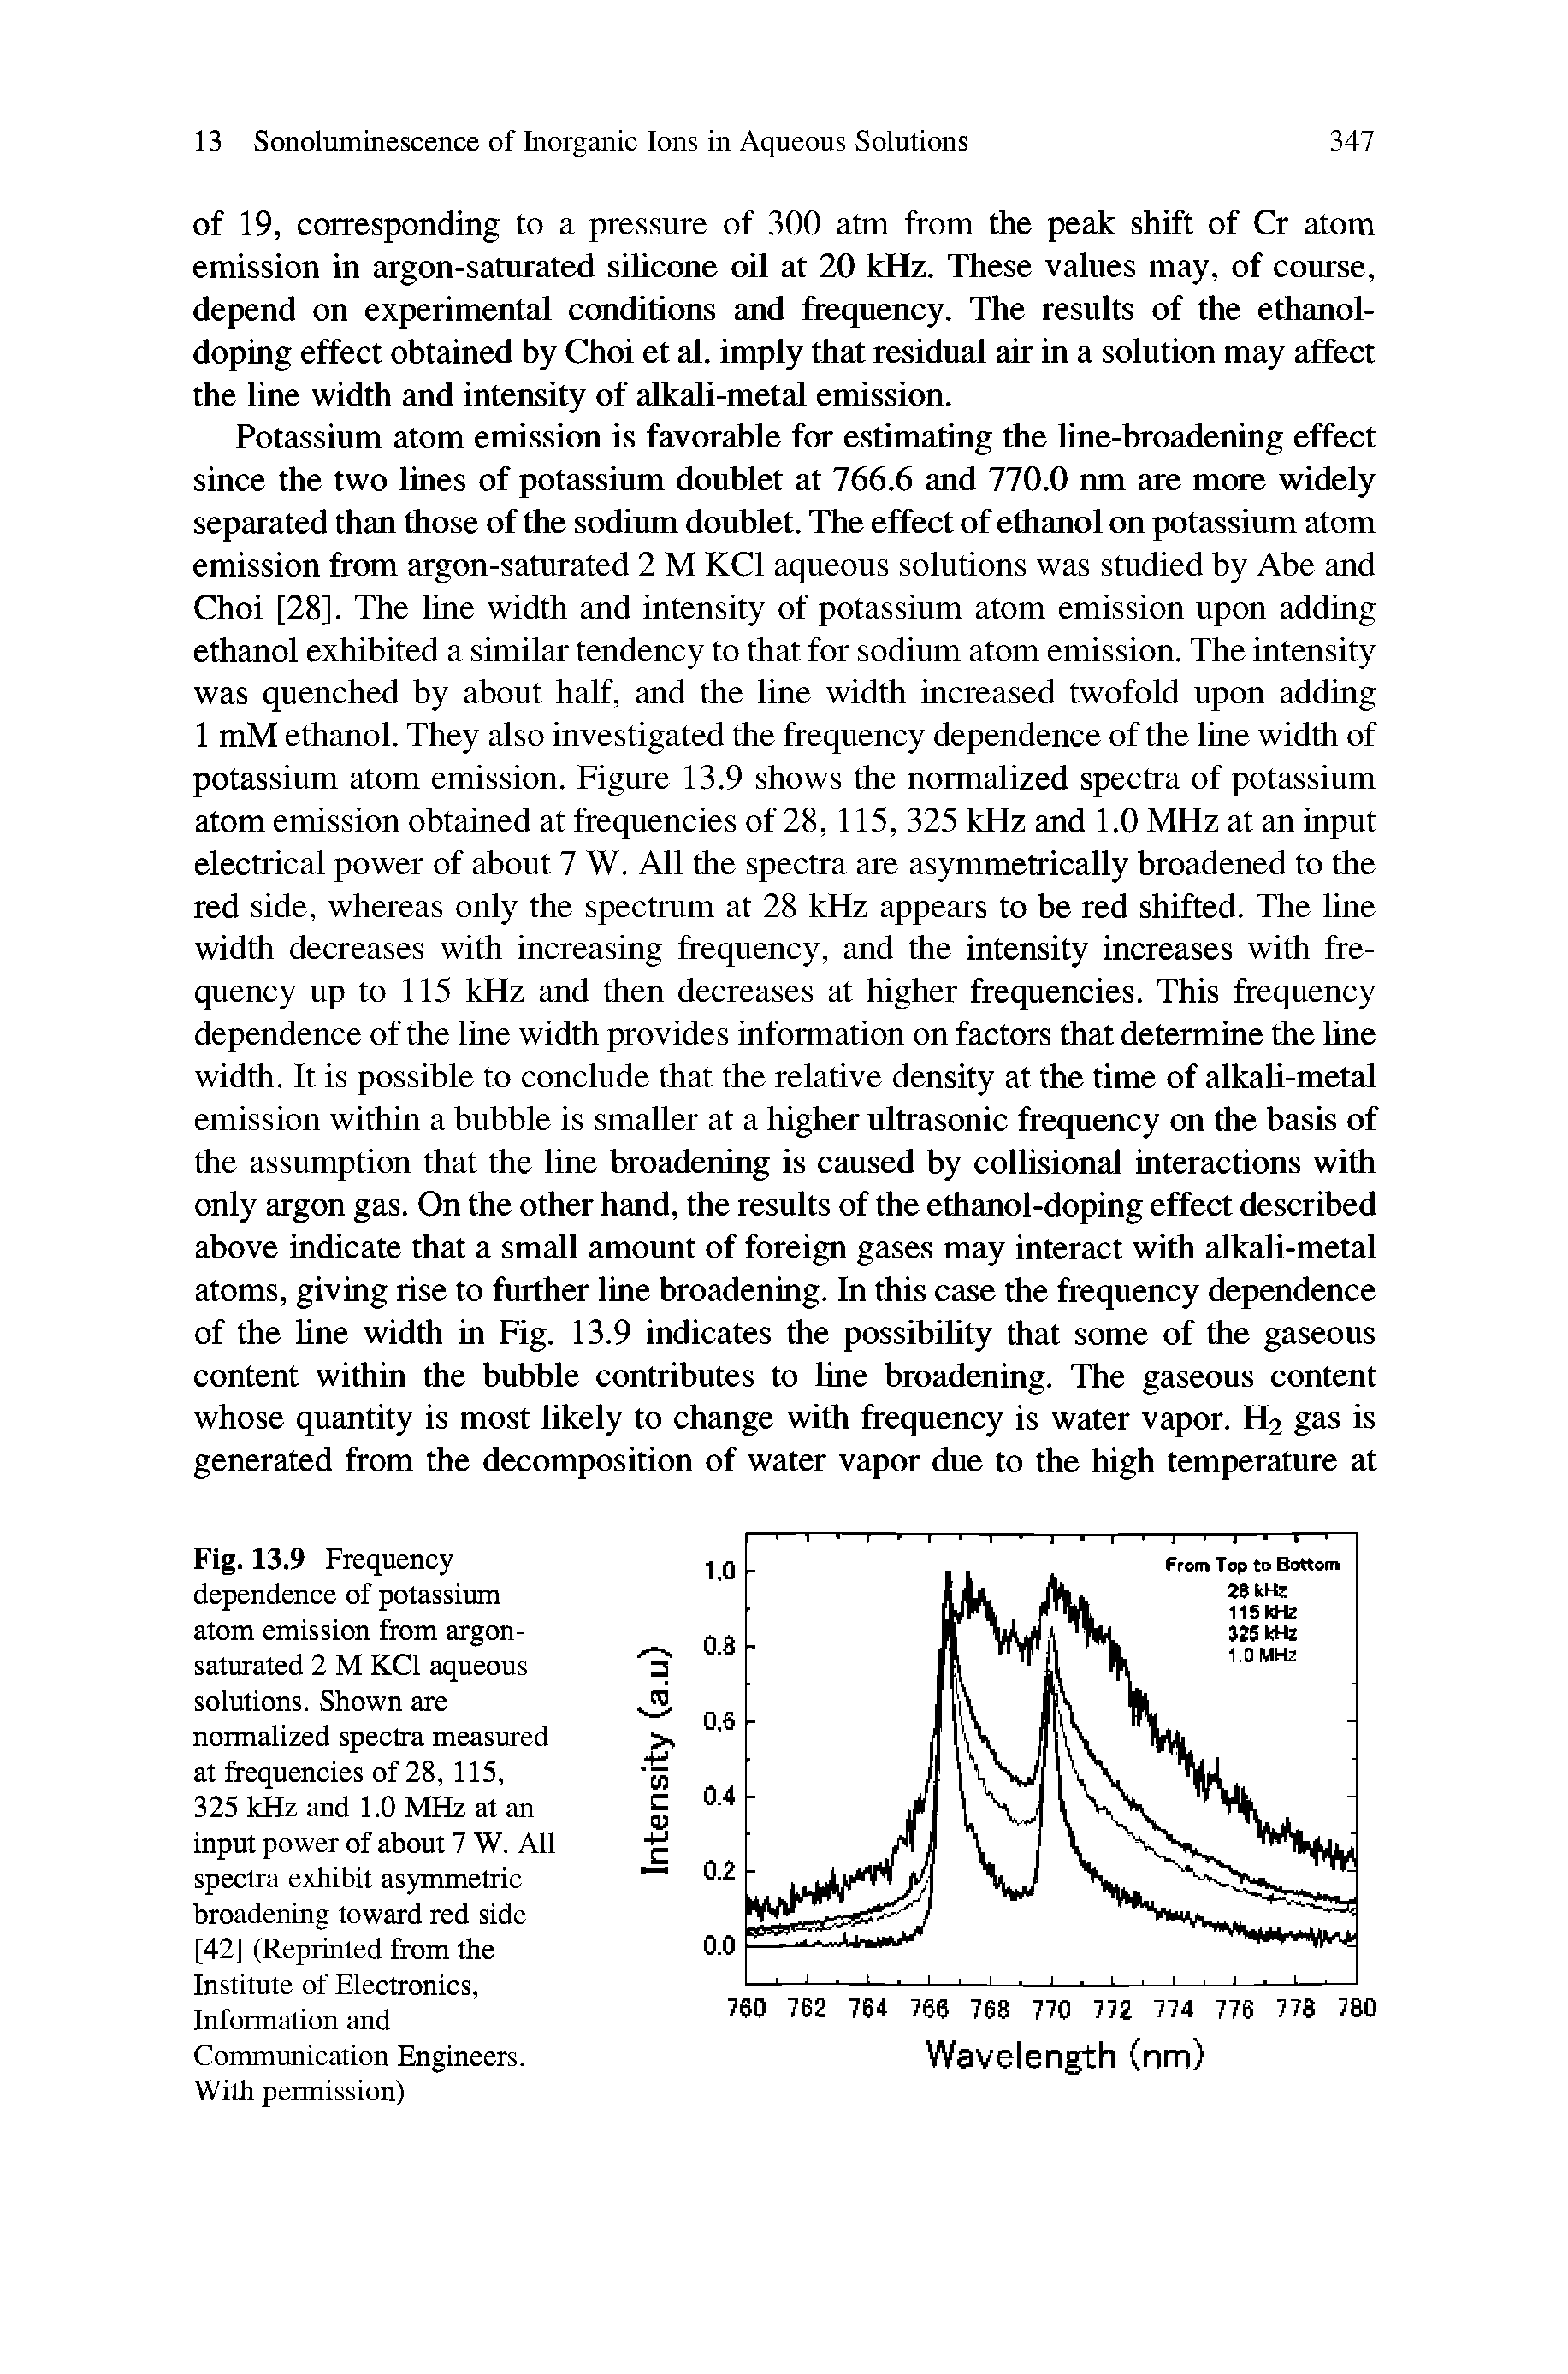 Fig. 13.9 Frequency dependence of potassium atom emission from argon-saturated 2 M KC1 aqueous solutions. Shown are normalized spectra measured at frequencies of 28, 115,...